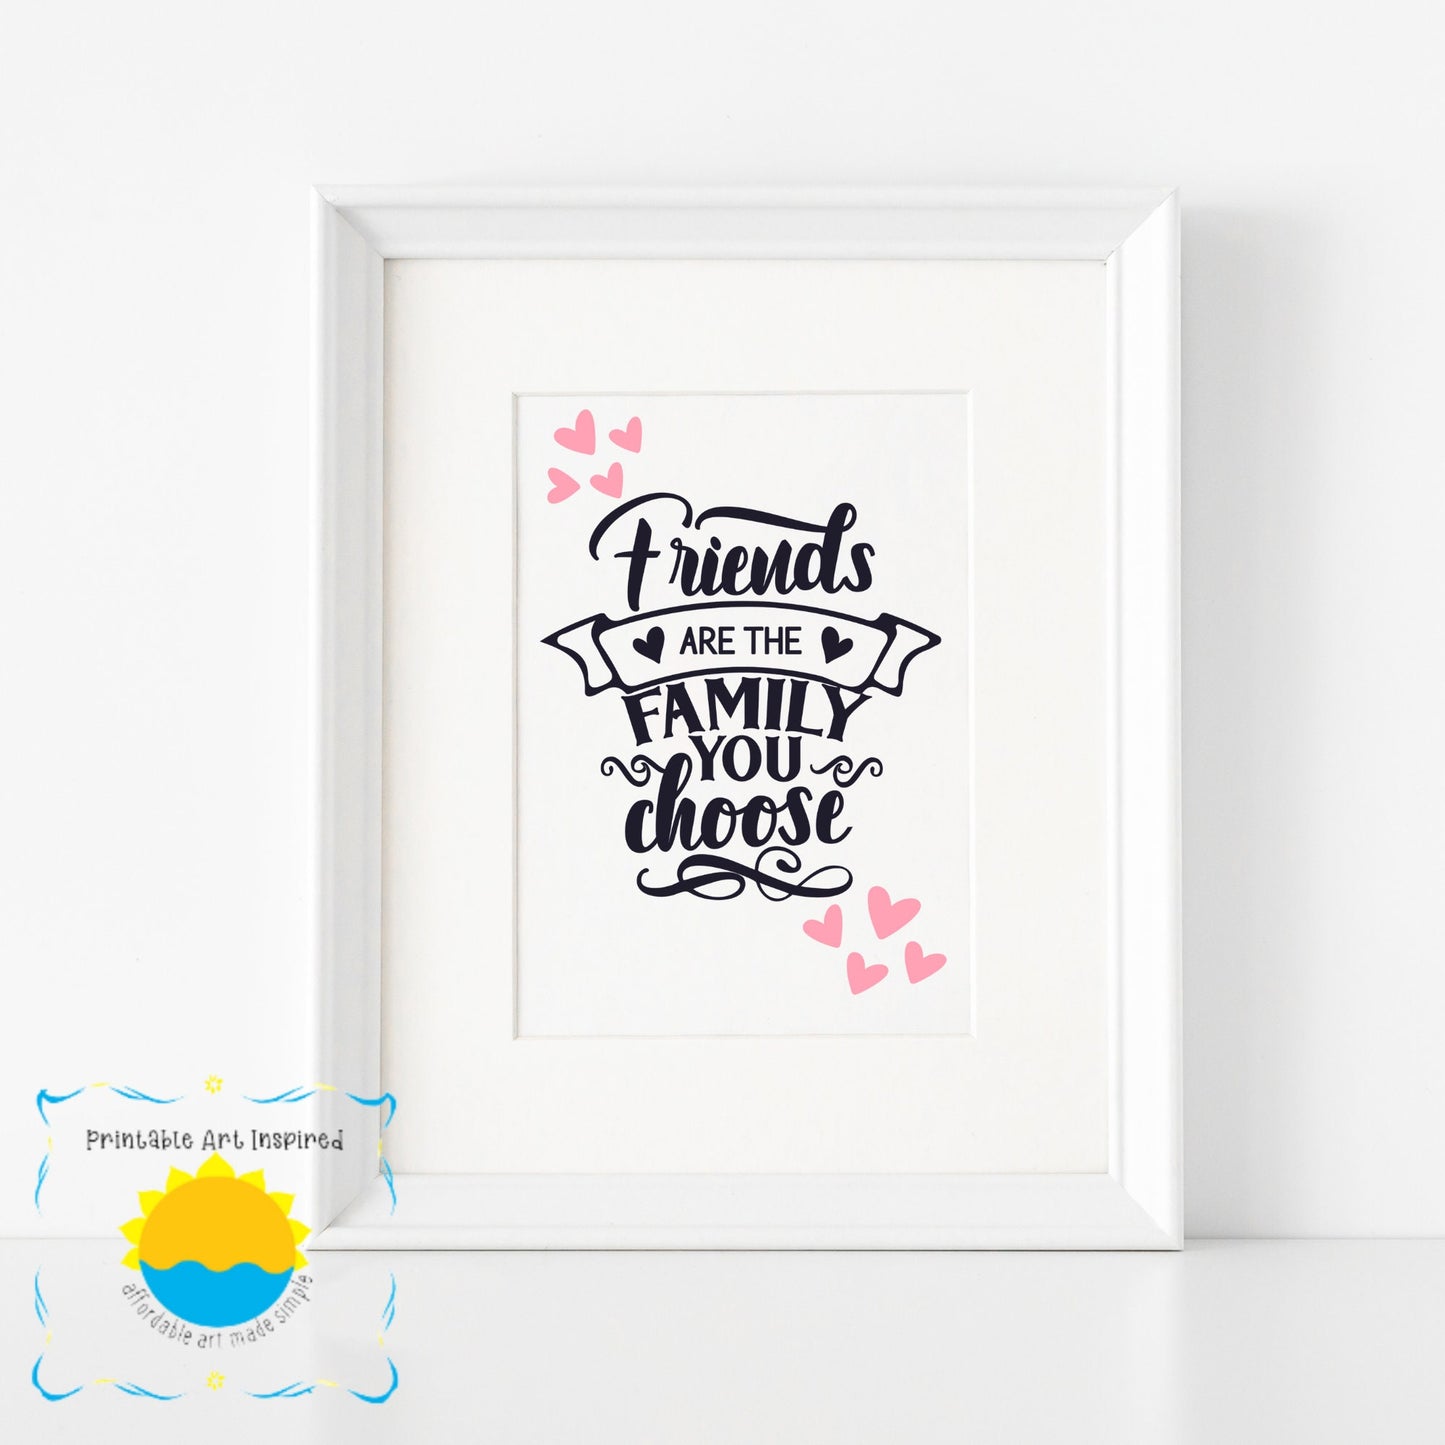 Friends are Family Art Printable for Wall Decor